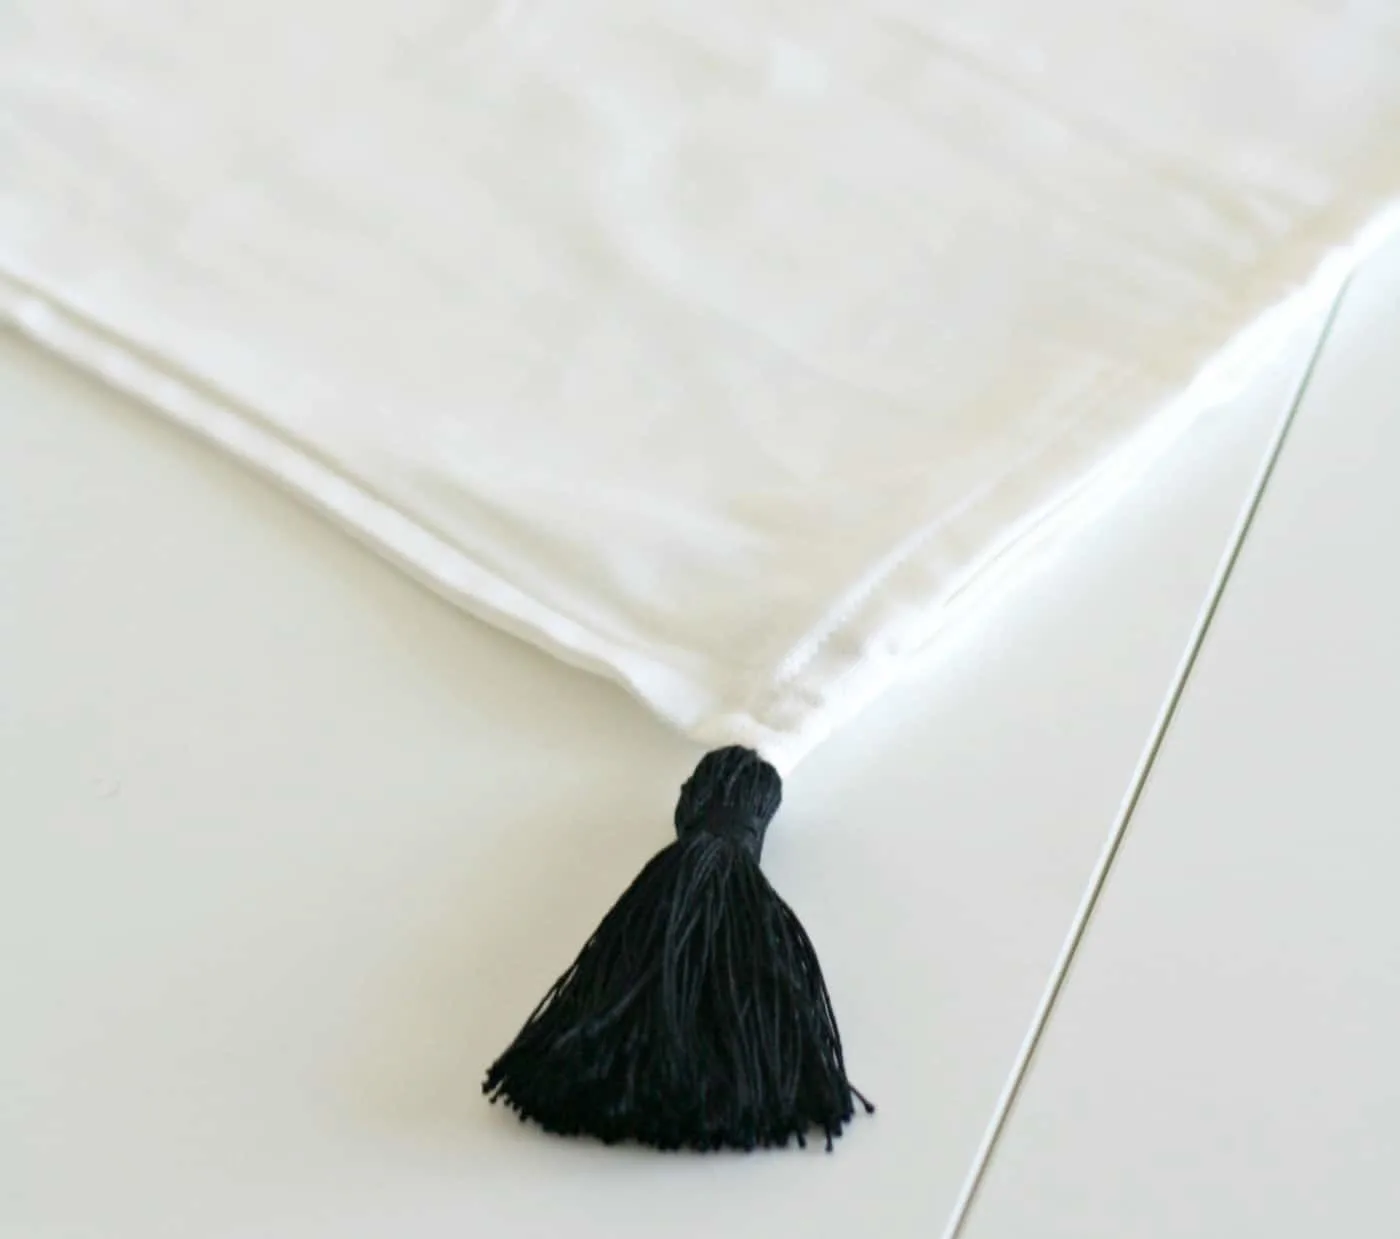 Tassel hand sewn to the corner of a white pillow cover